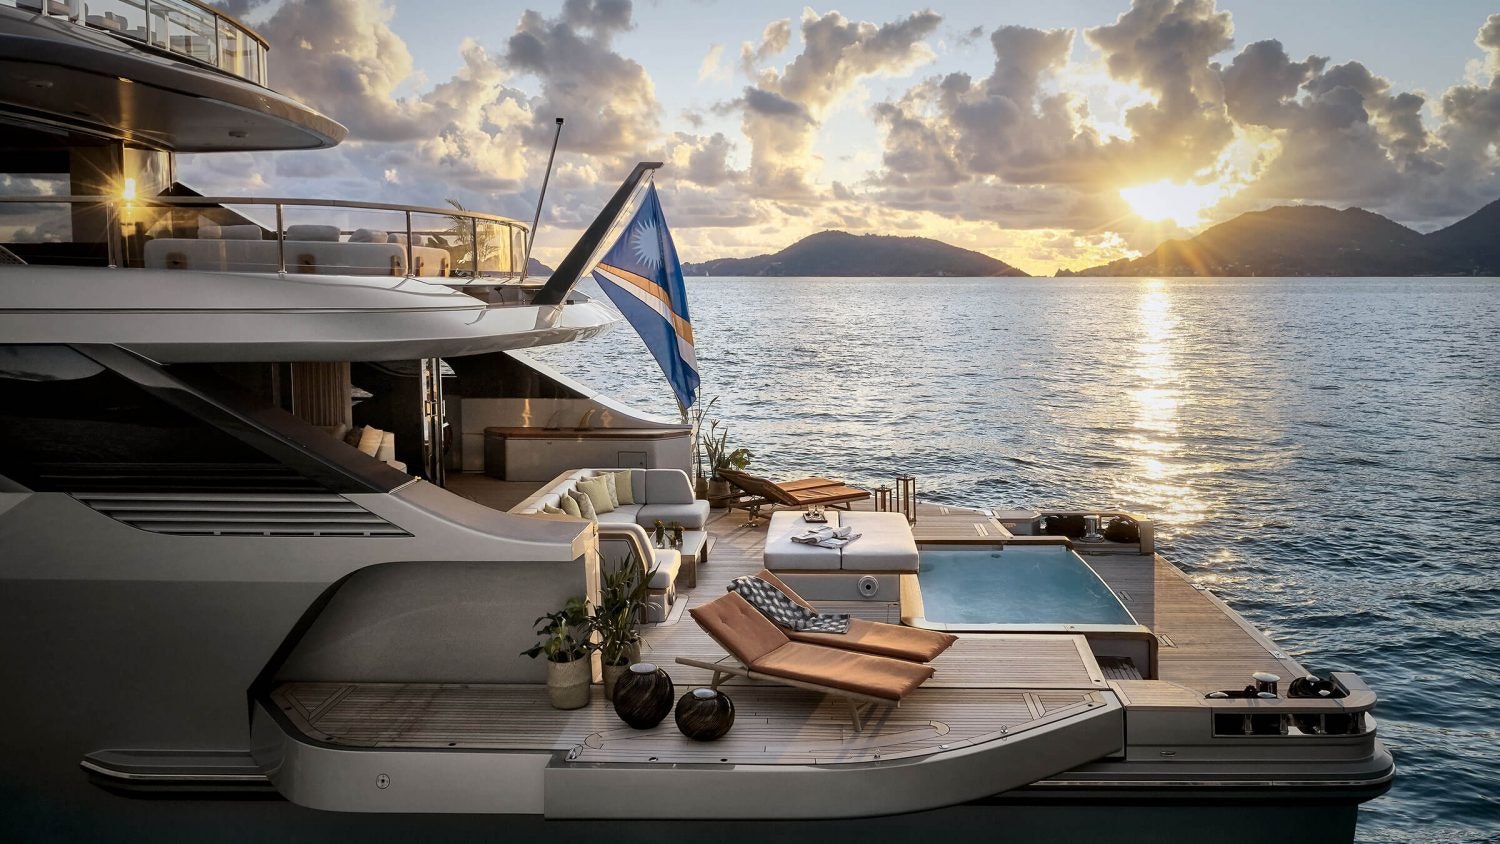 Yacht exterior at sunset.